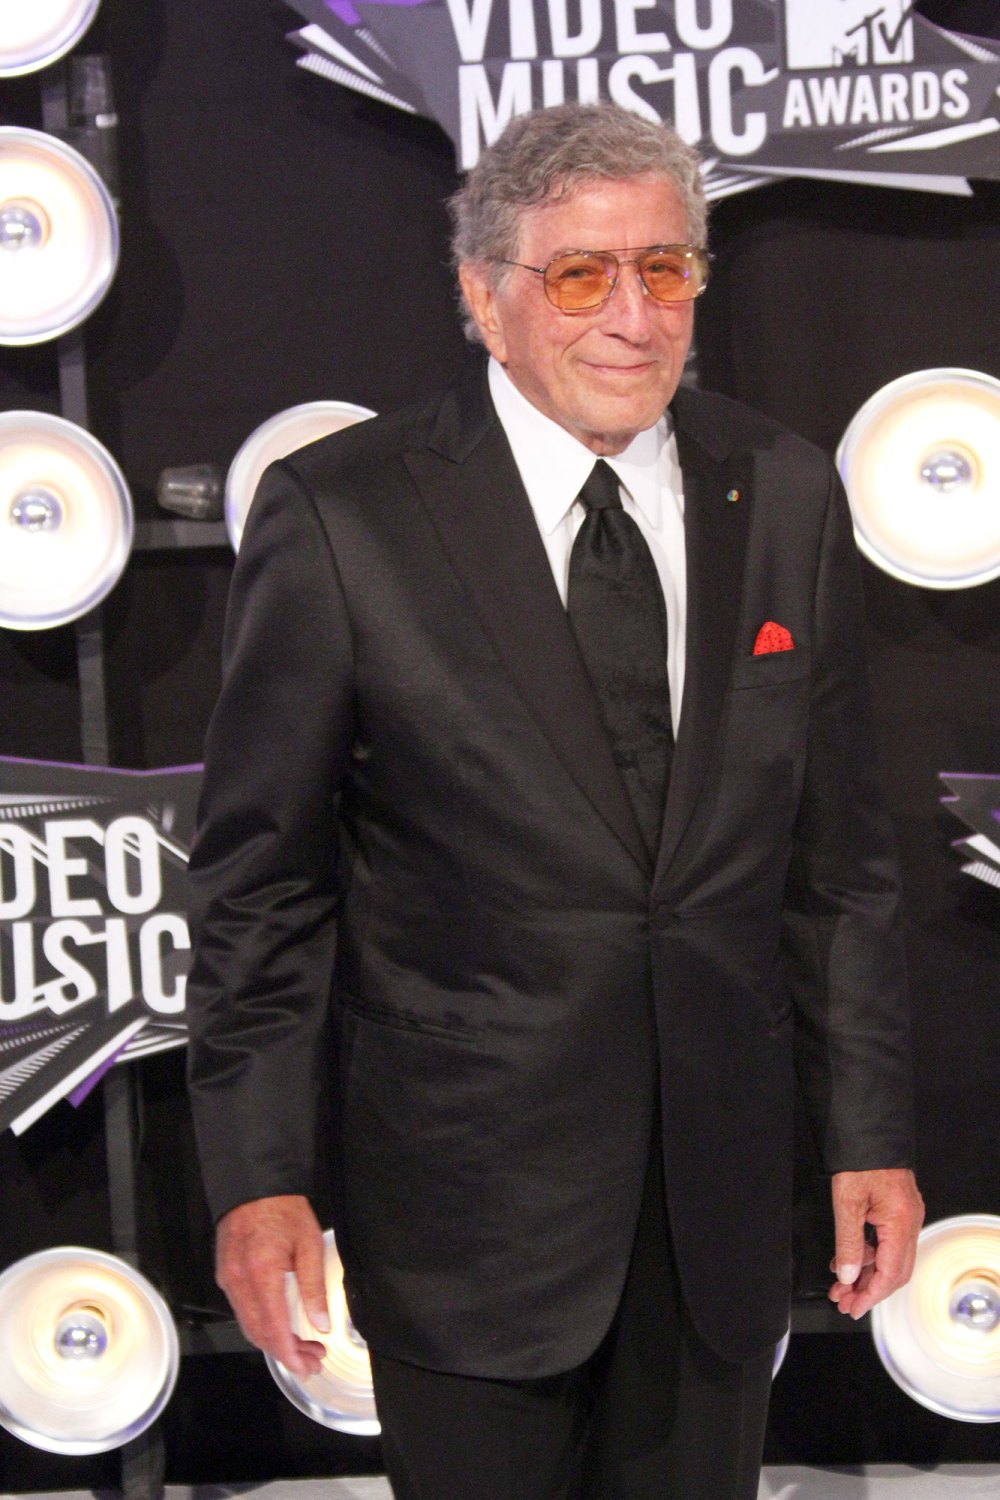 Tony Bennett Paying Tribute to Amy Winehouse at MTV VMAs - Us Weekly